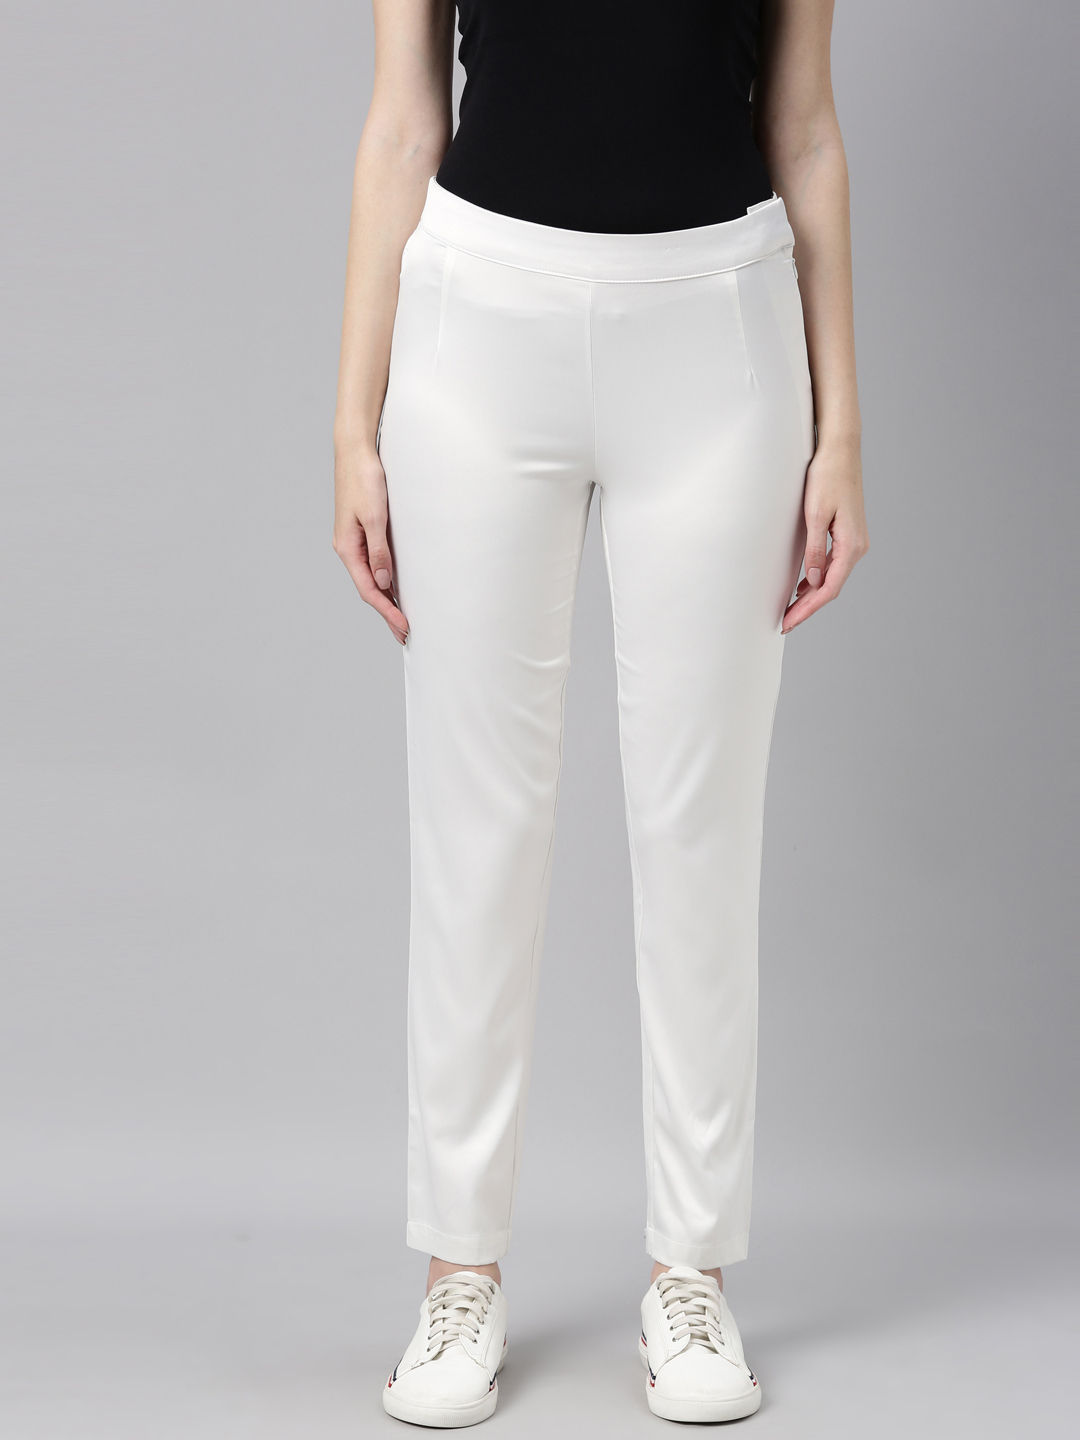 Libas Women Off White Pure Cotton Trousers Price in India Full  Specifications  Offers  DTashioncom